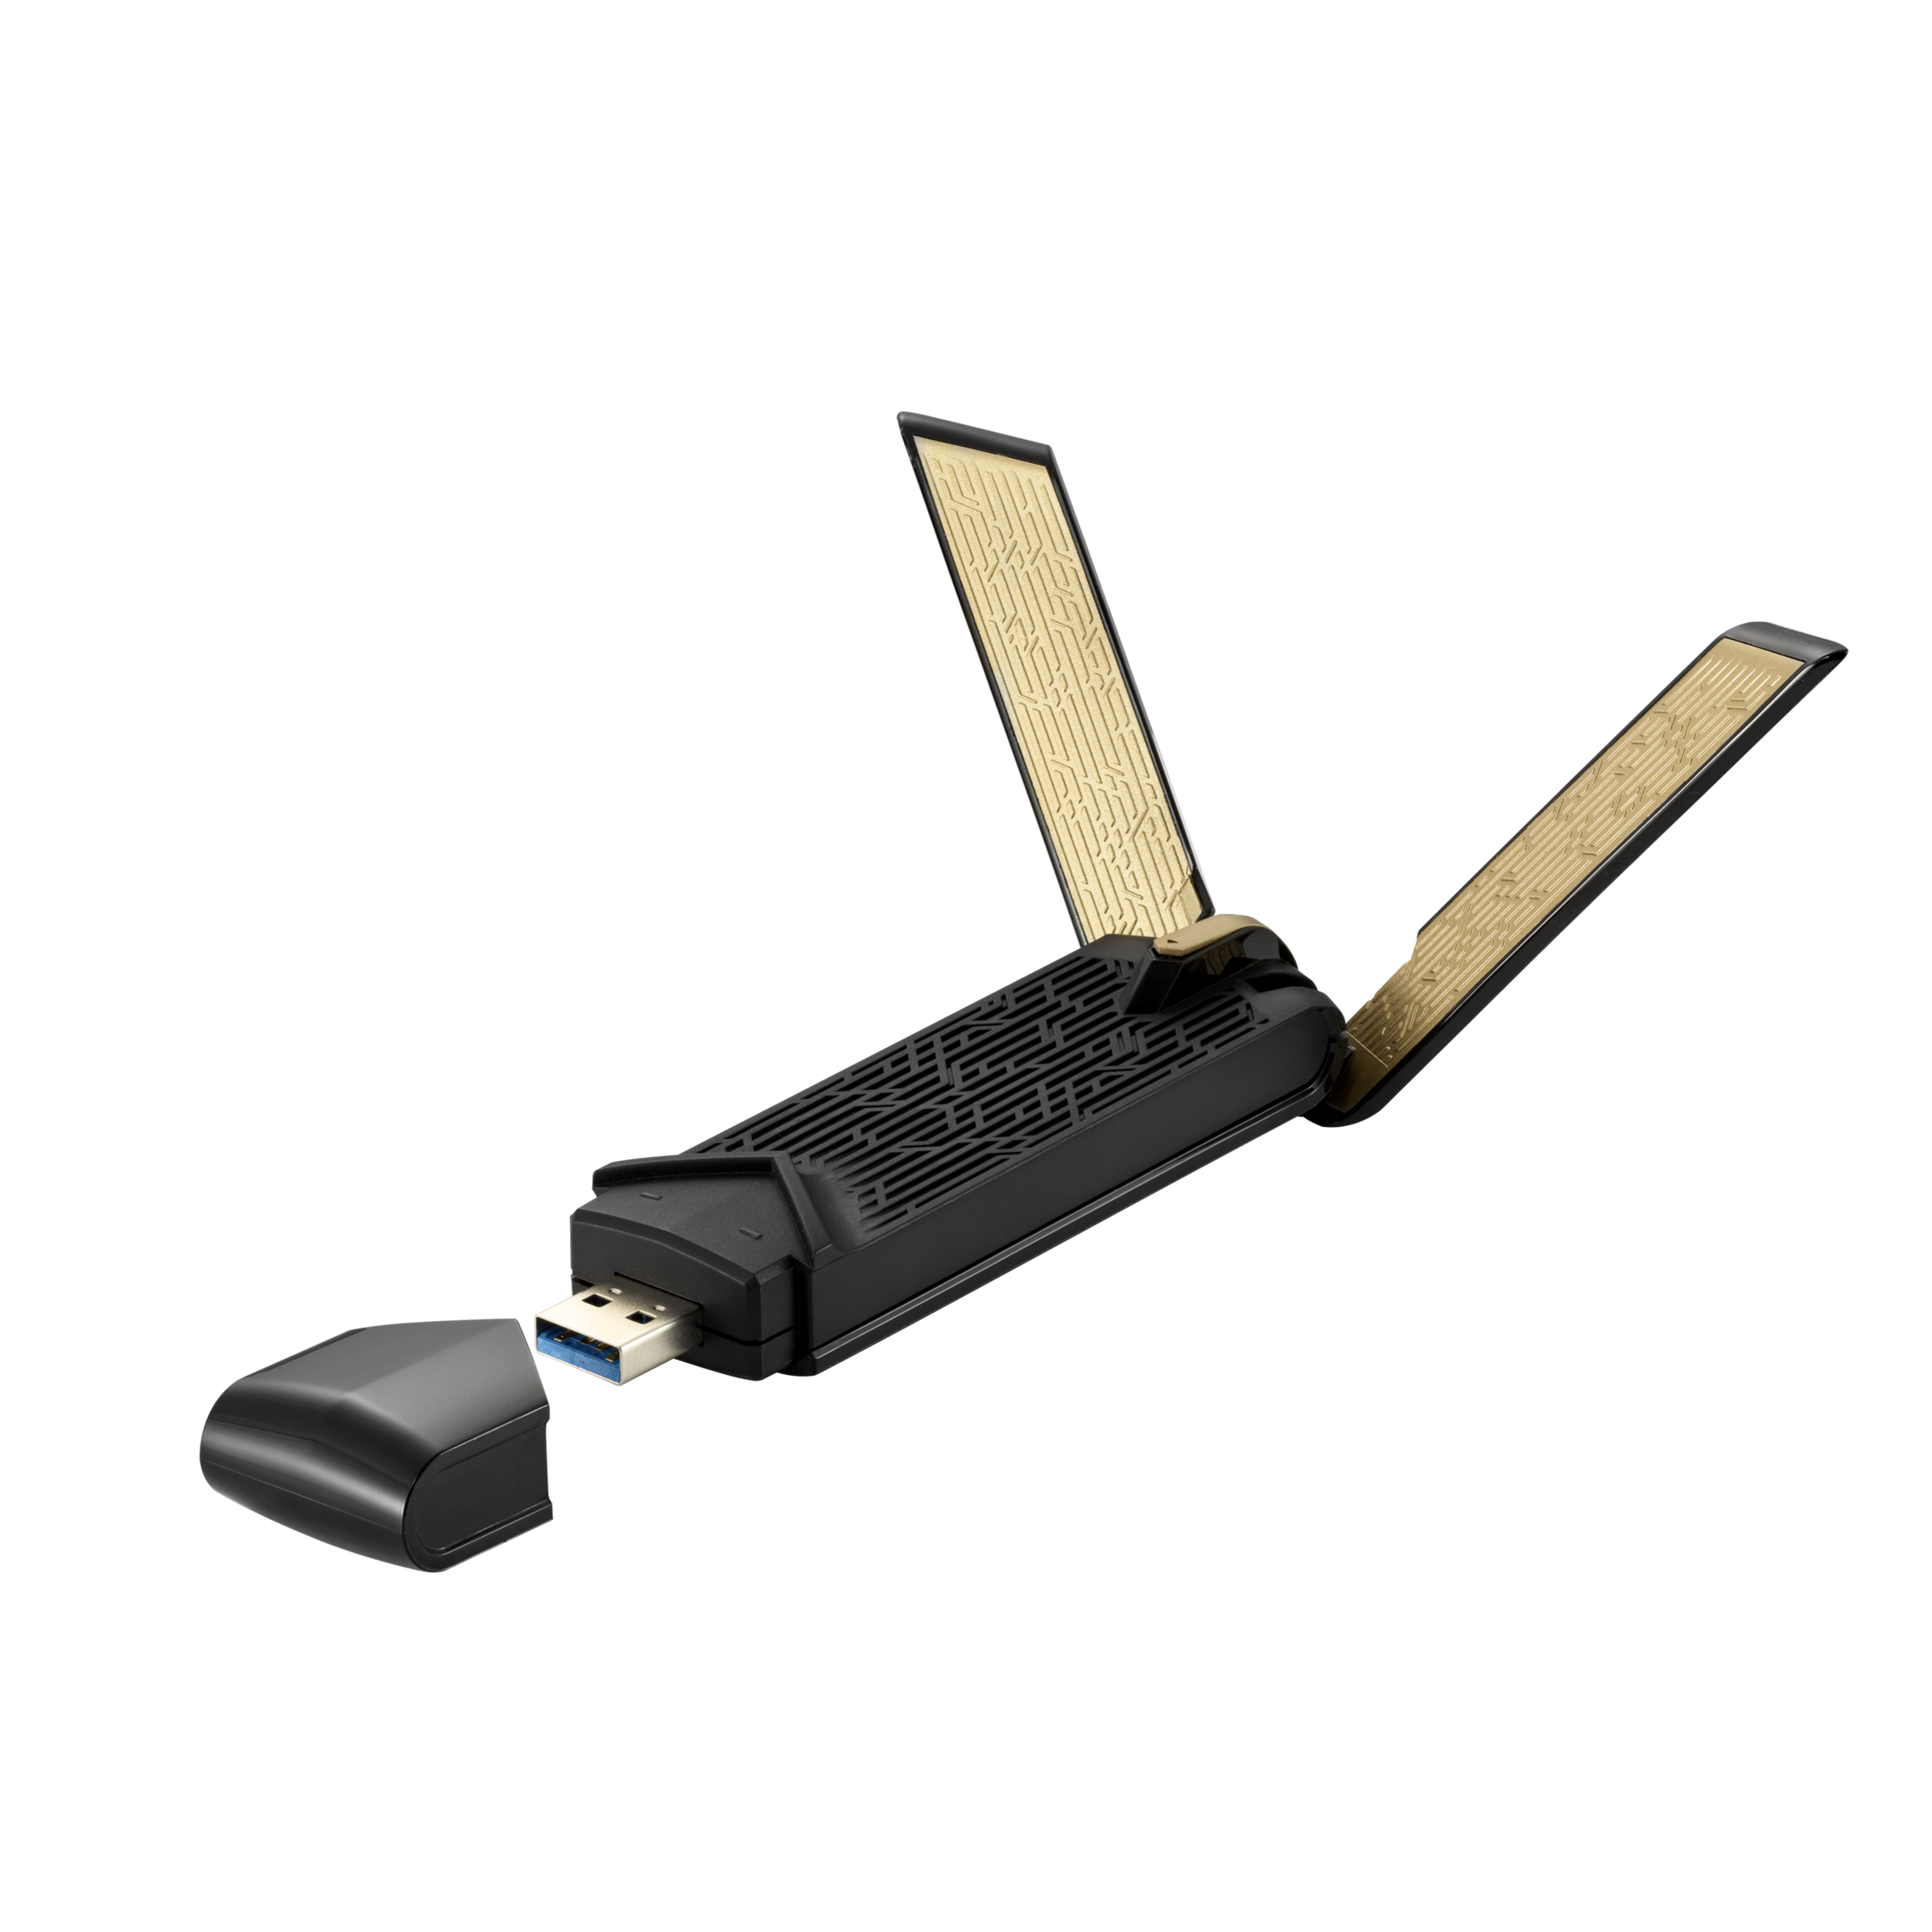 regiment Foresee dagbog USB-AX56｜Adapters｜ASUS Global